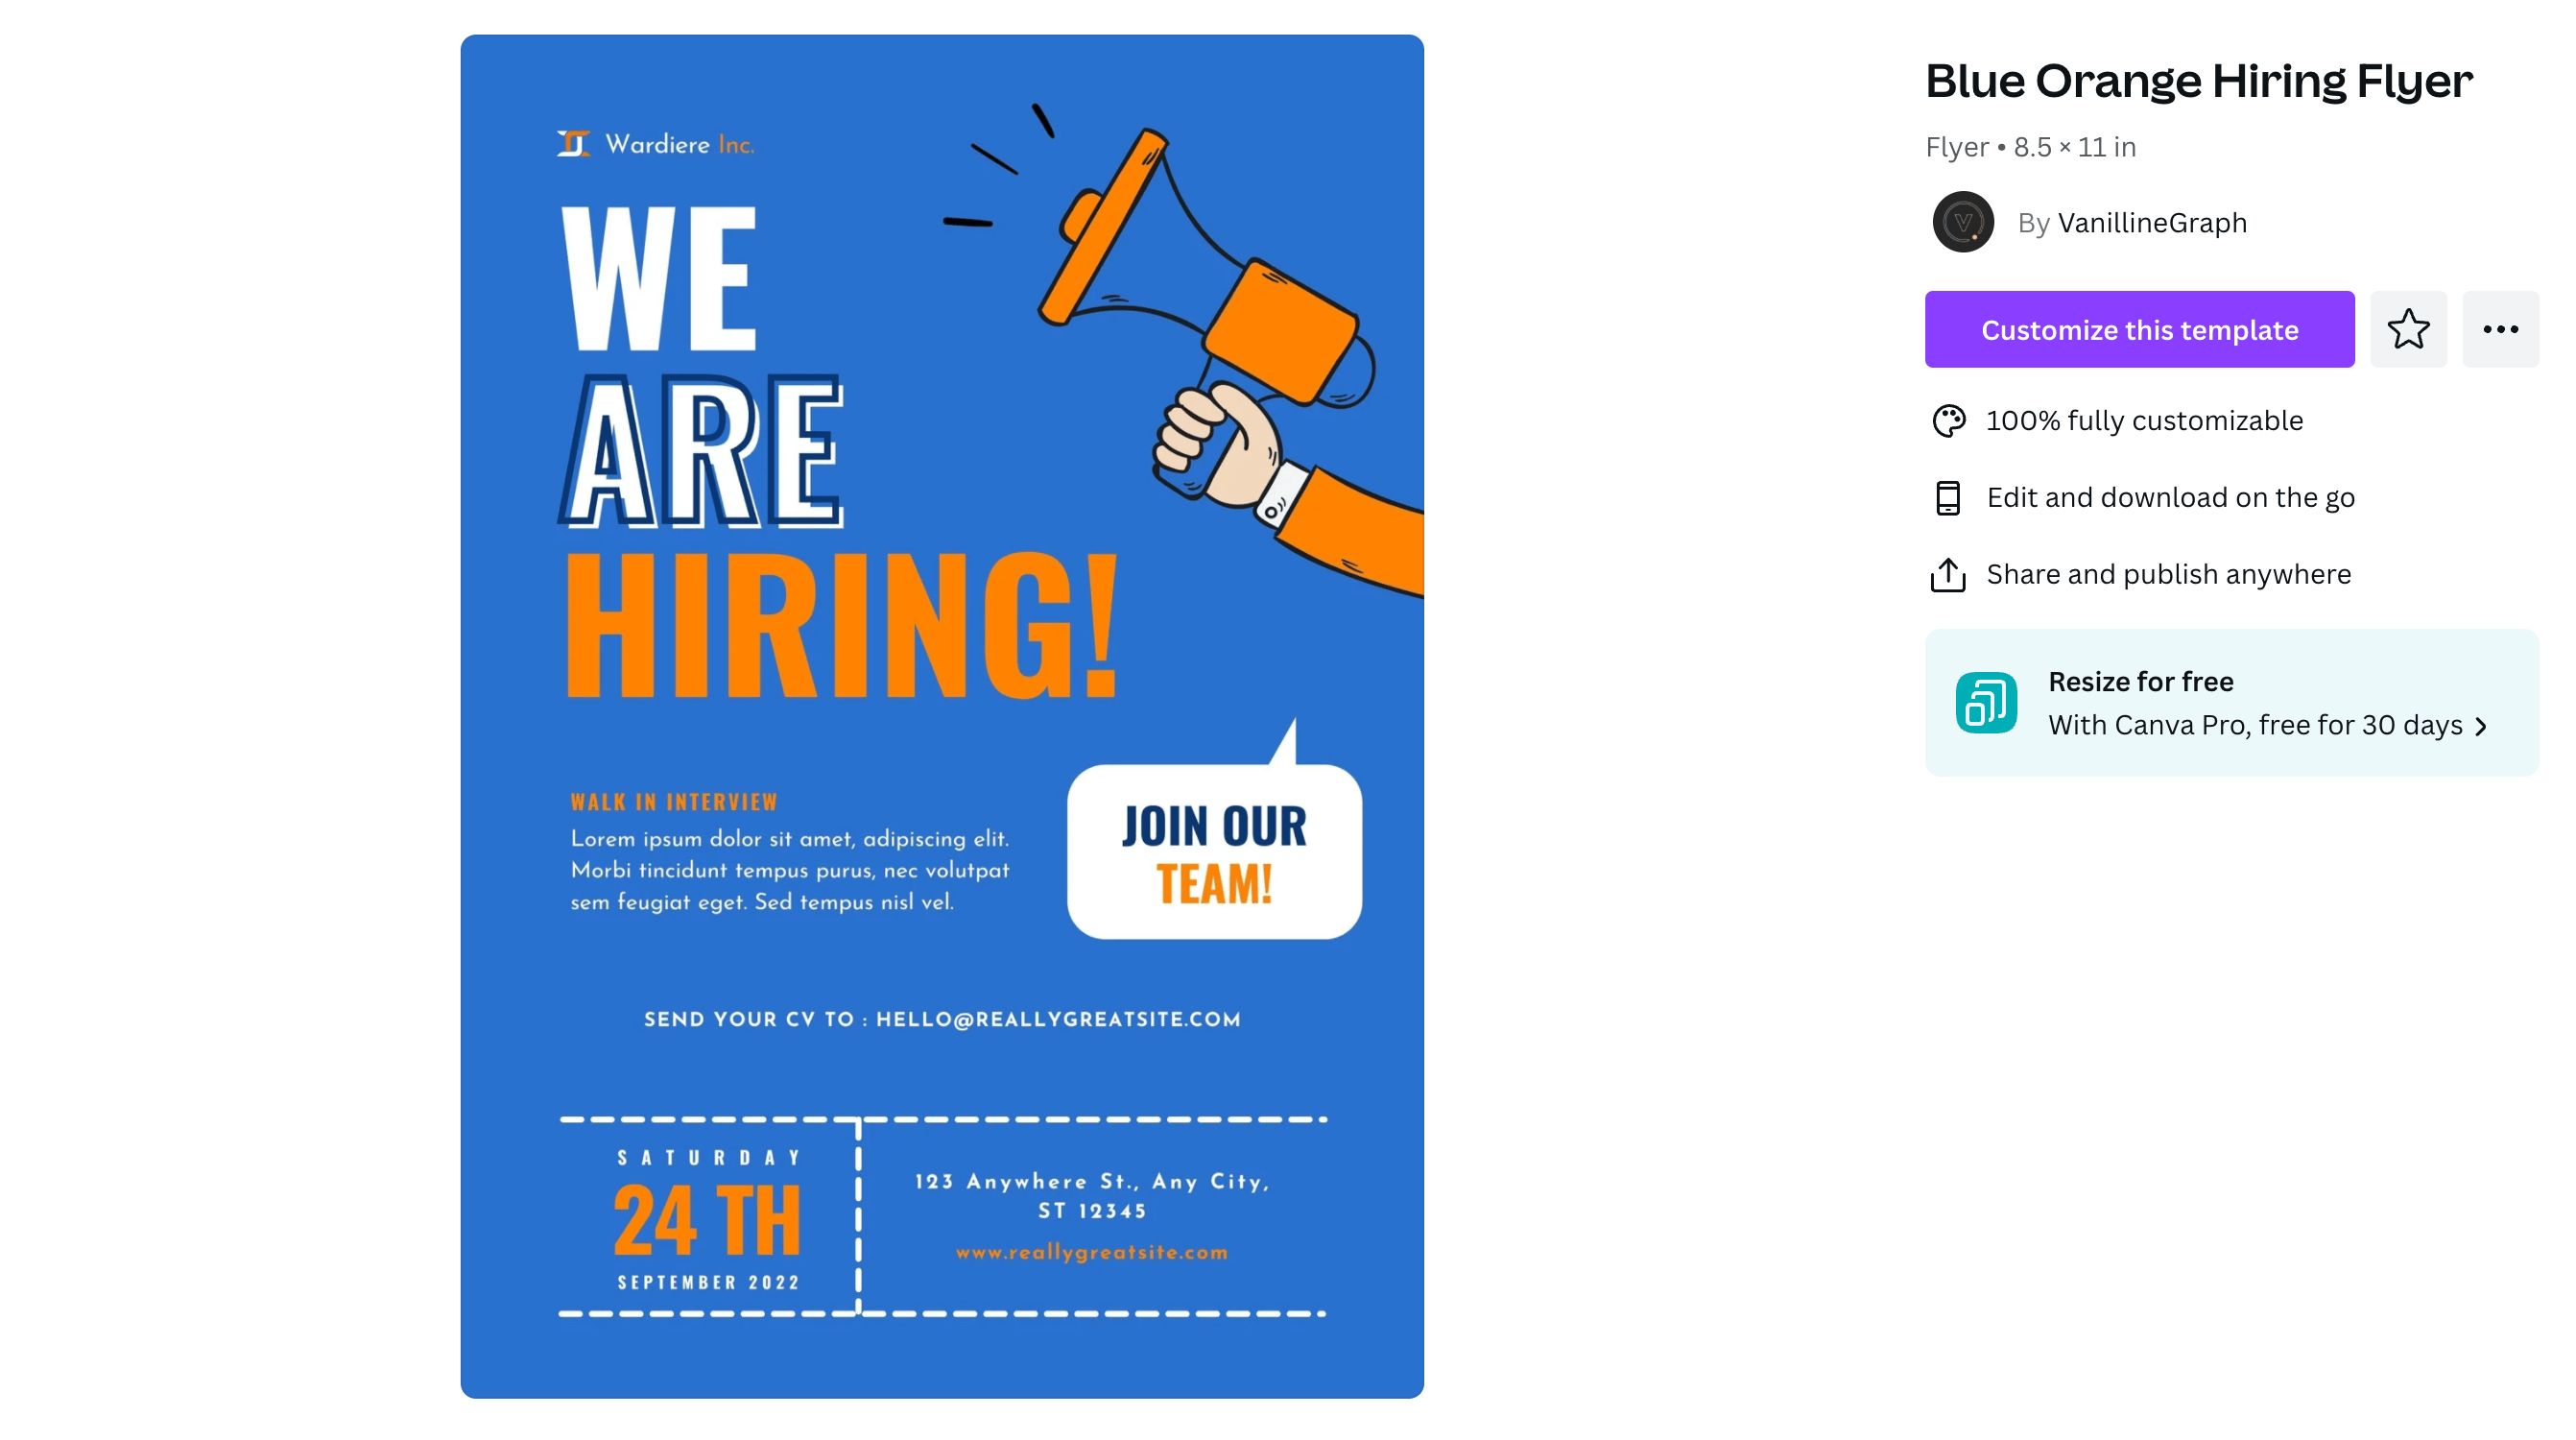 A blue "We are hiring!" flyer with an illustration of an arm holding a megaphone. 